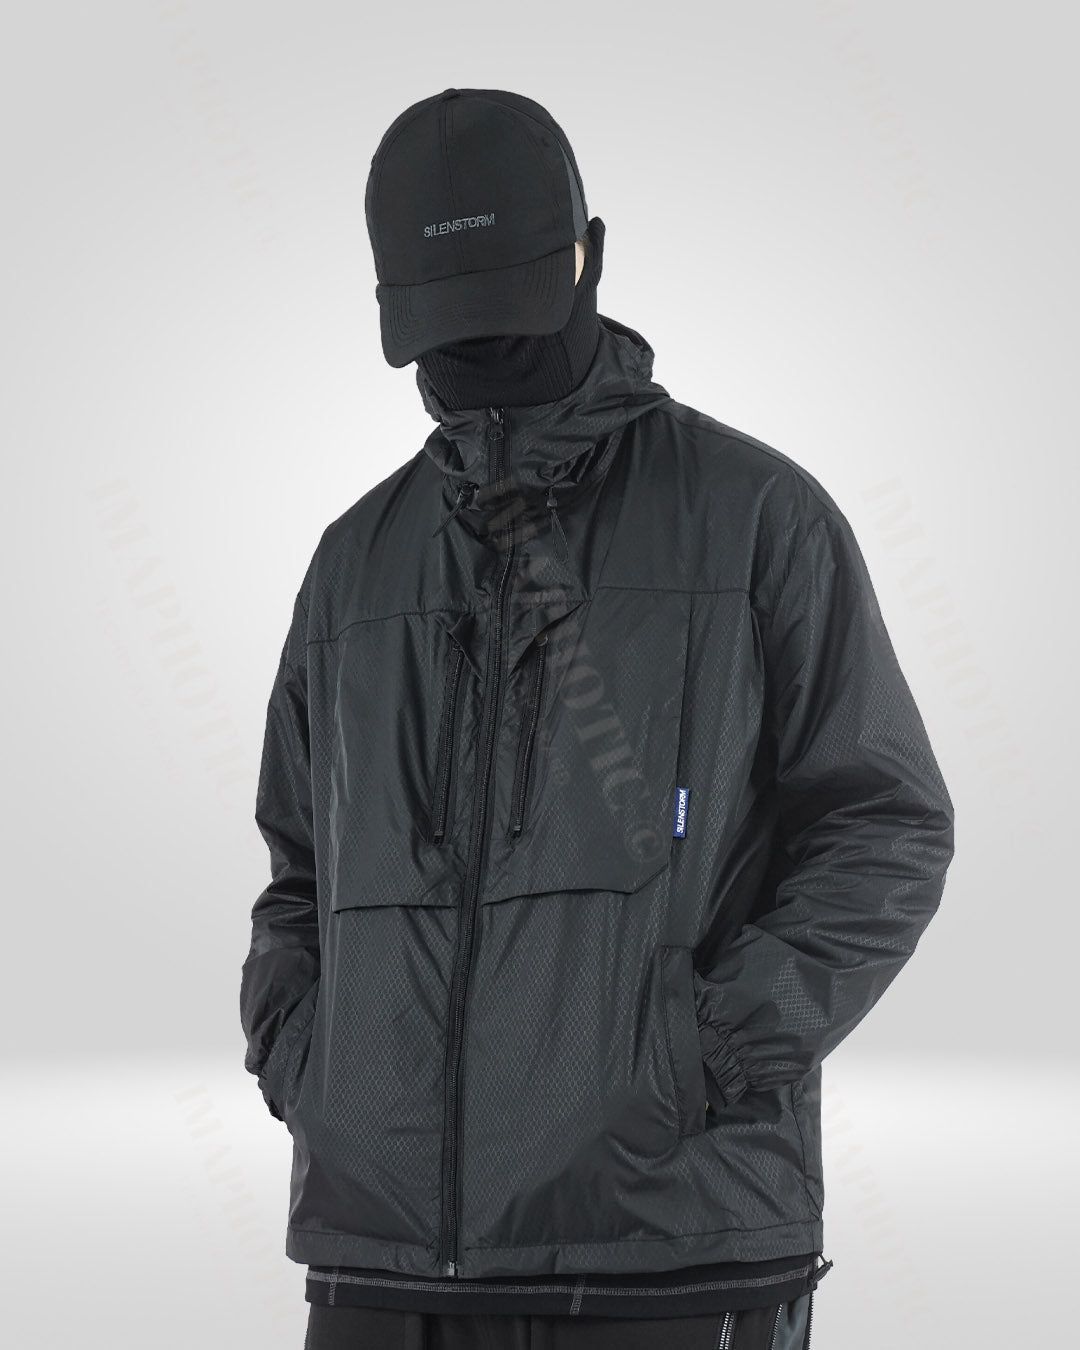 Black Sun Protection Jacket - UV Protection Lightweight Outdoor